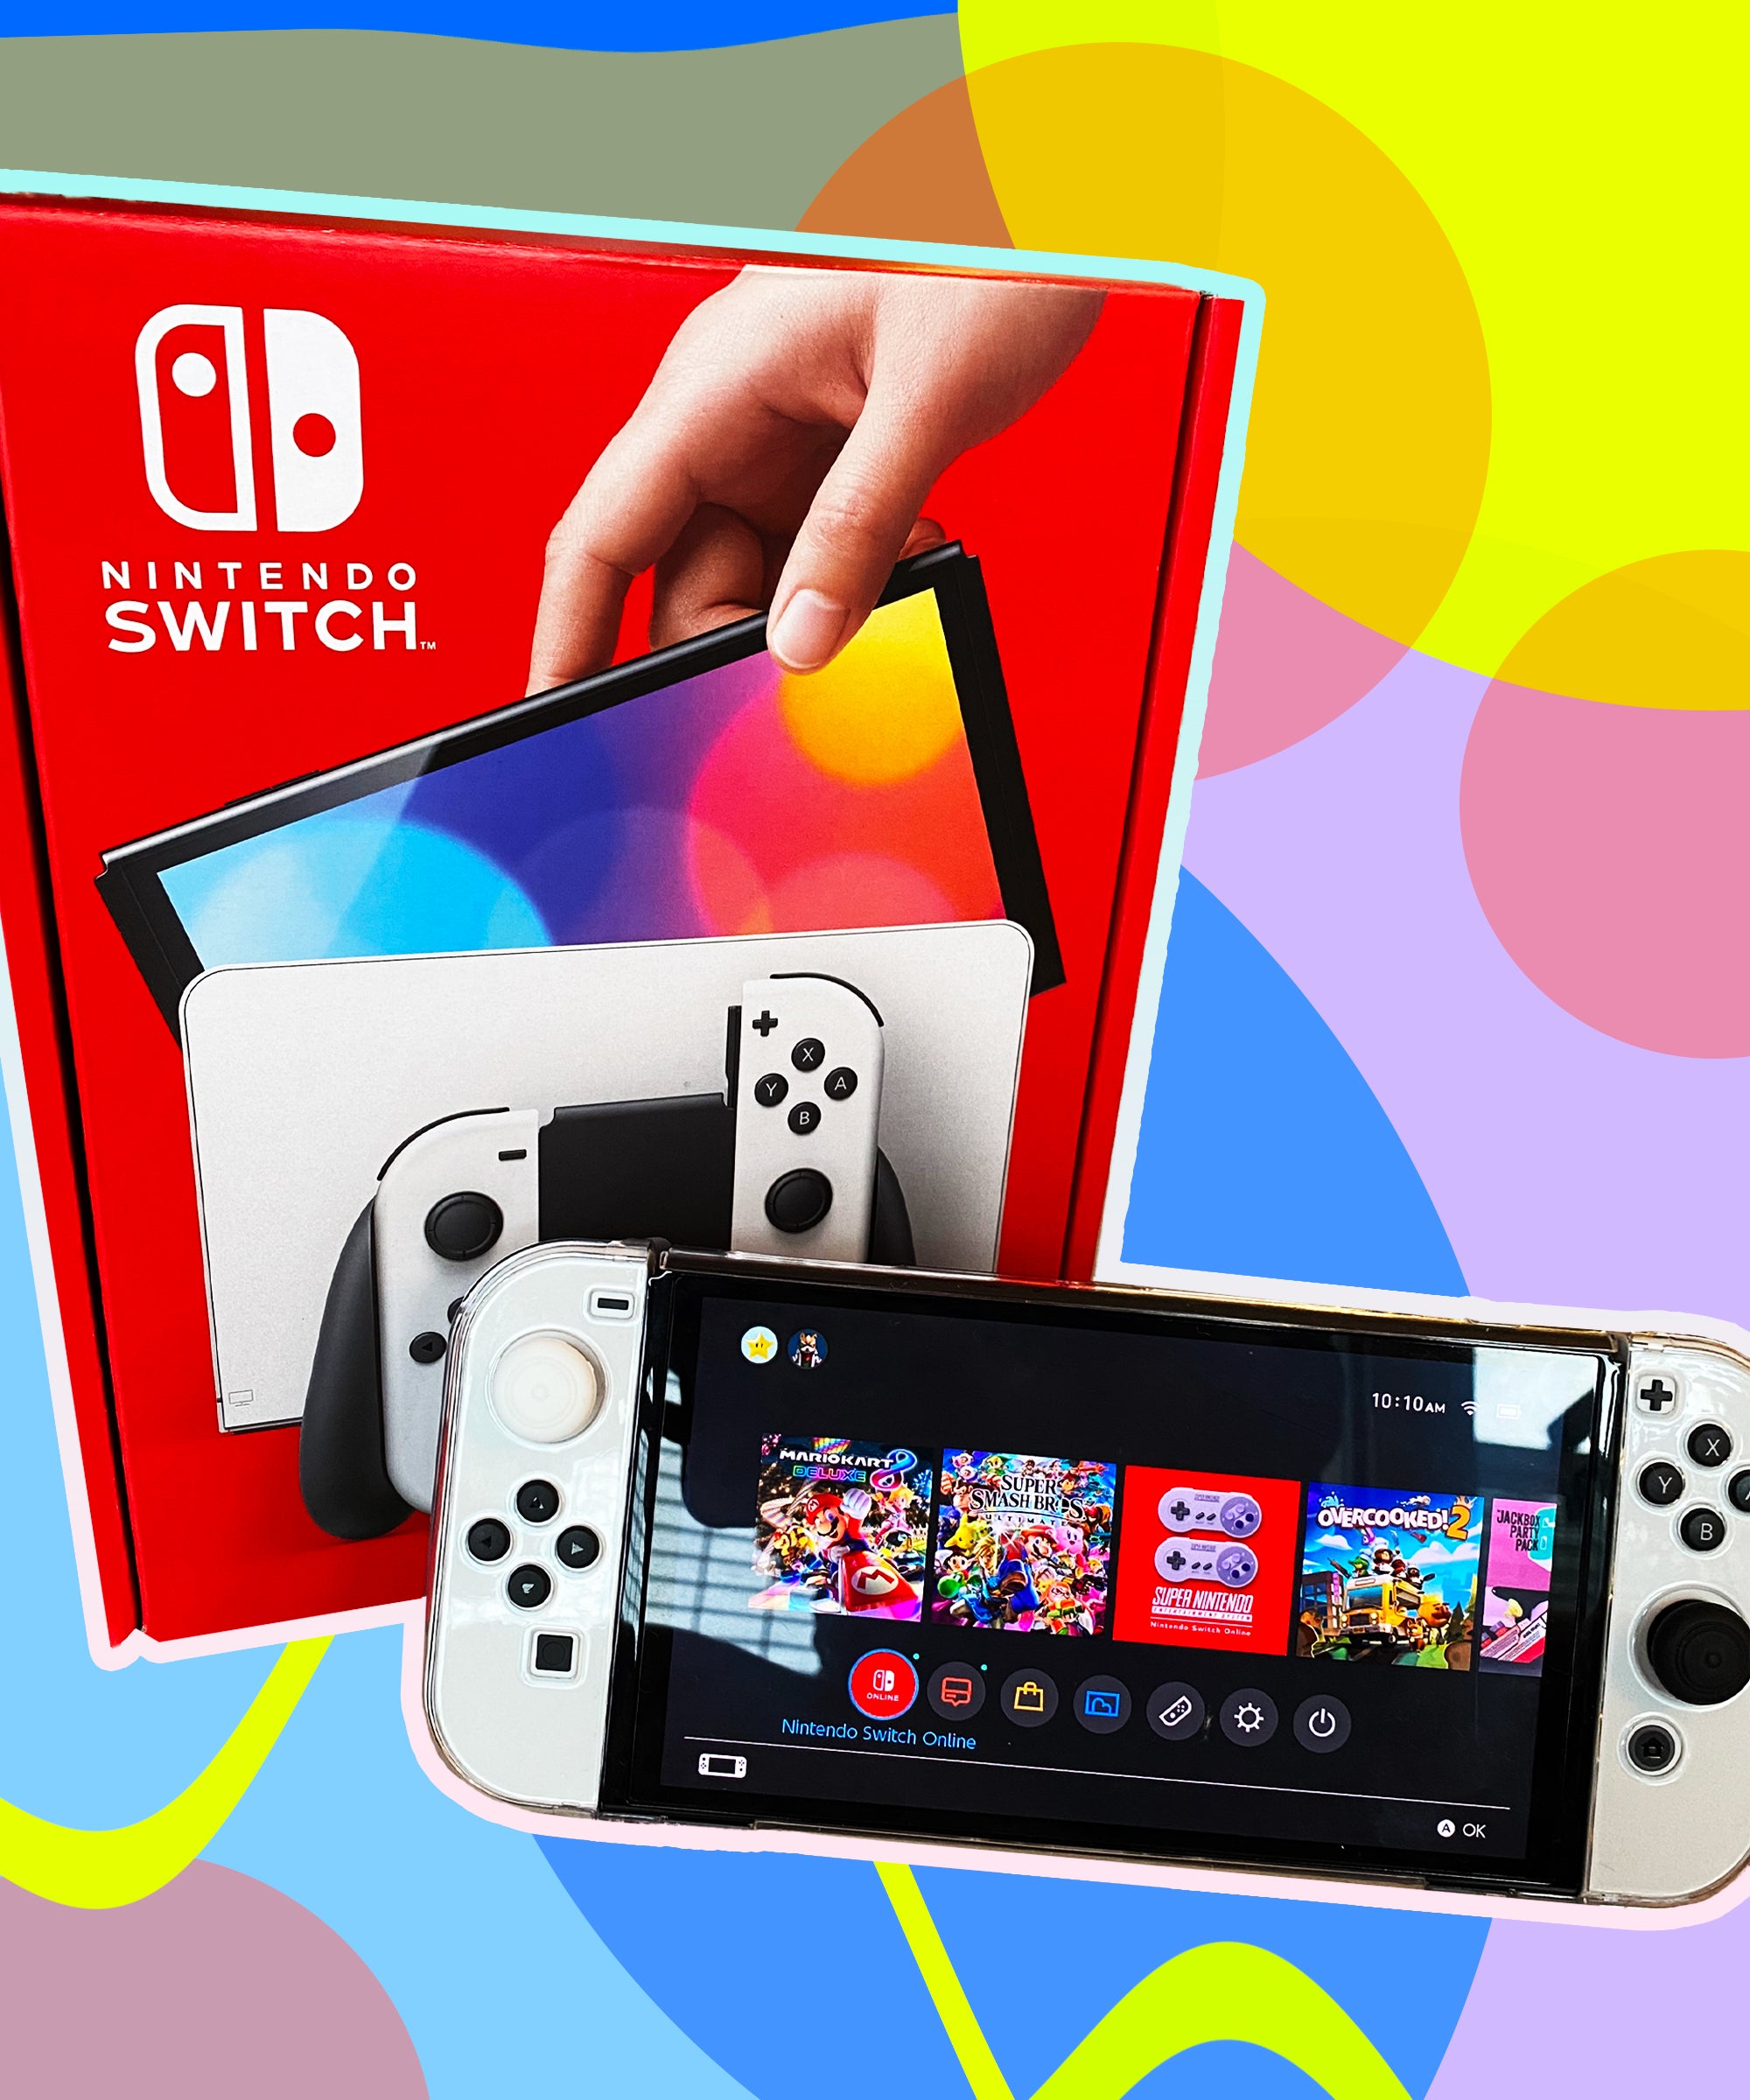 Will there be Nintendo Switch OLED restocks on Black Friday